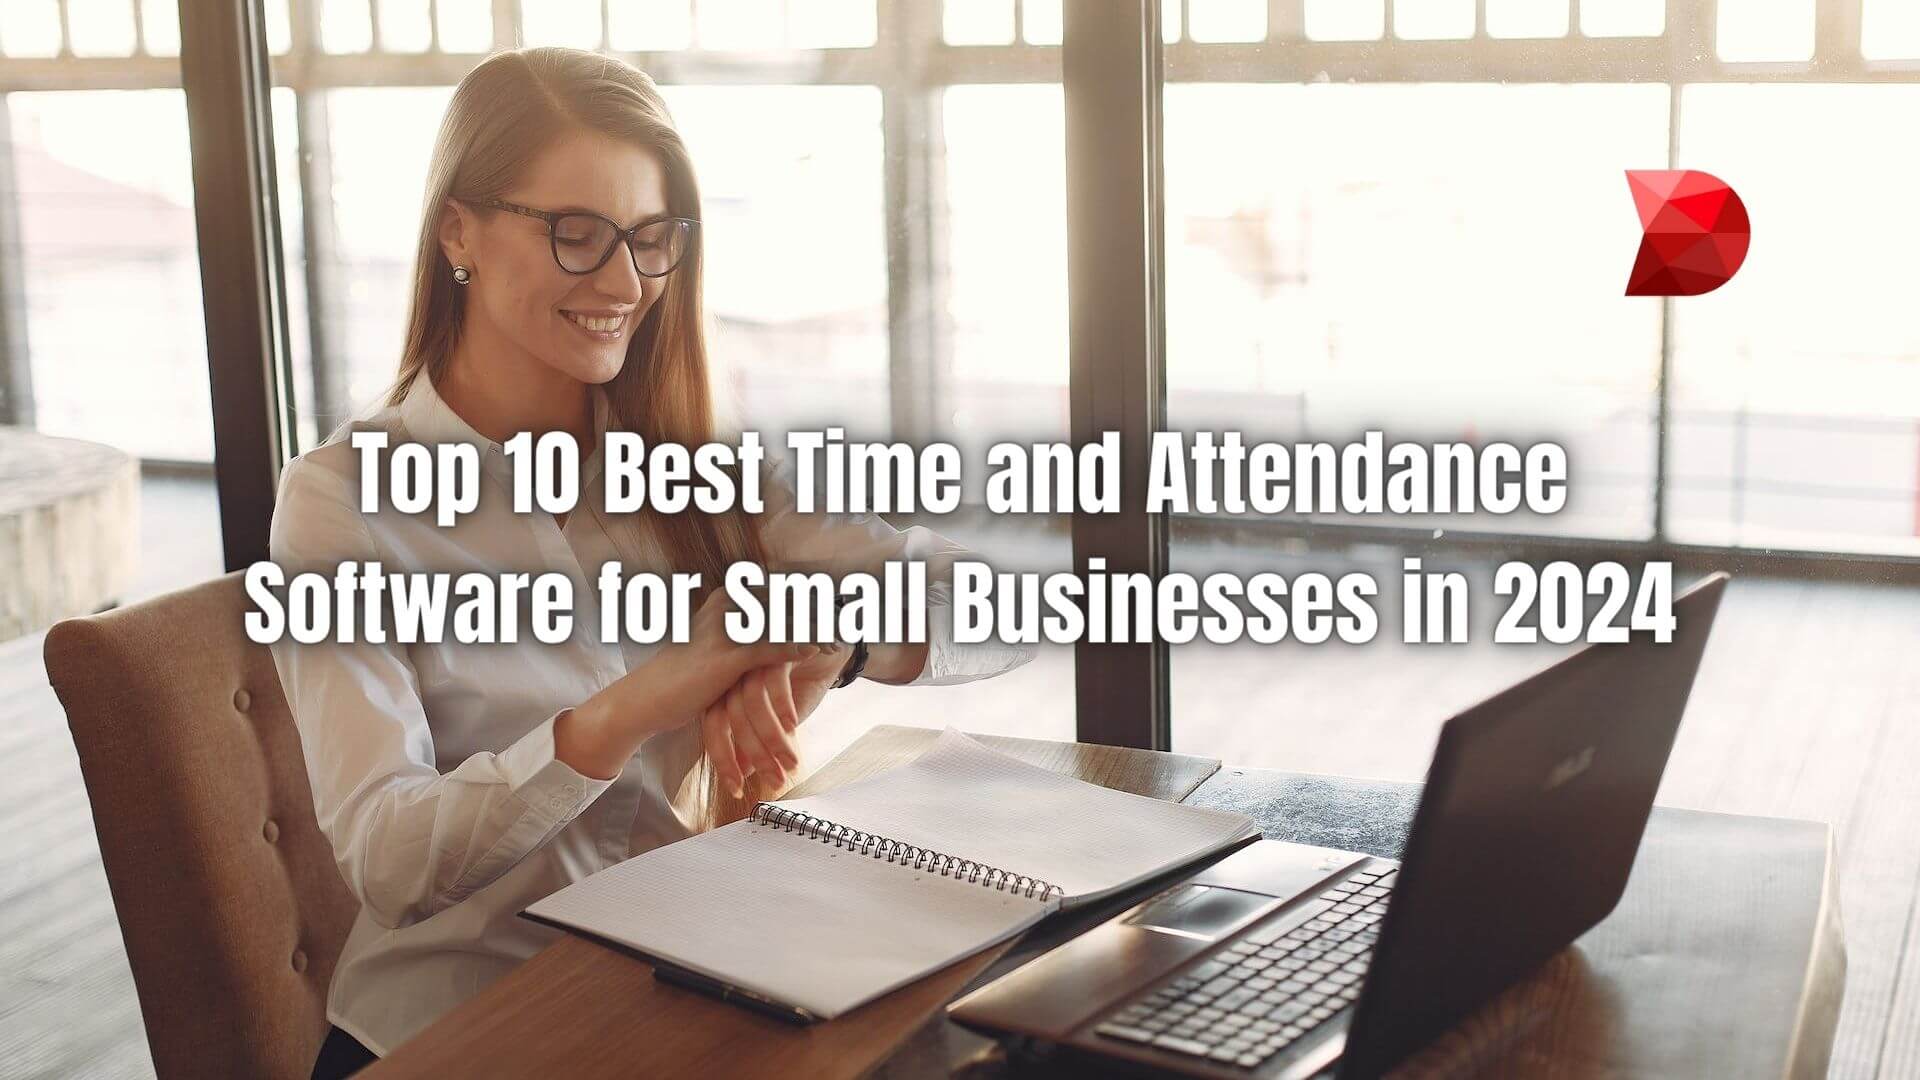 Streamline your workforce management effortlessly! Discover the top 10 time and attendance software tailored for small businesses in 2024.